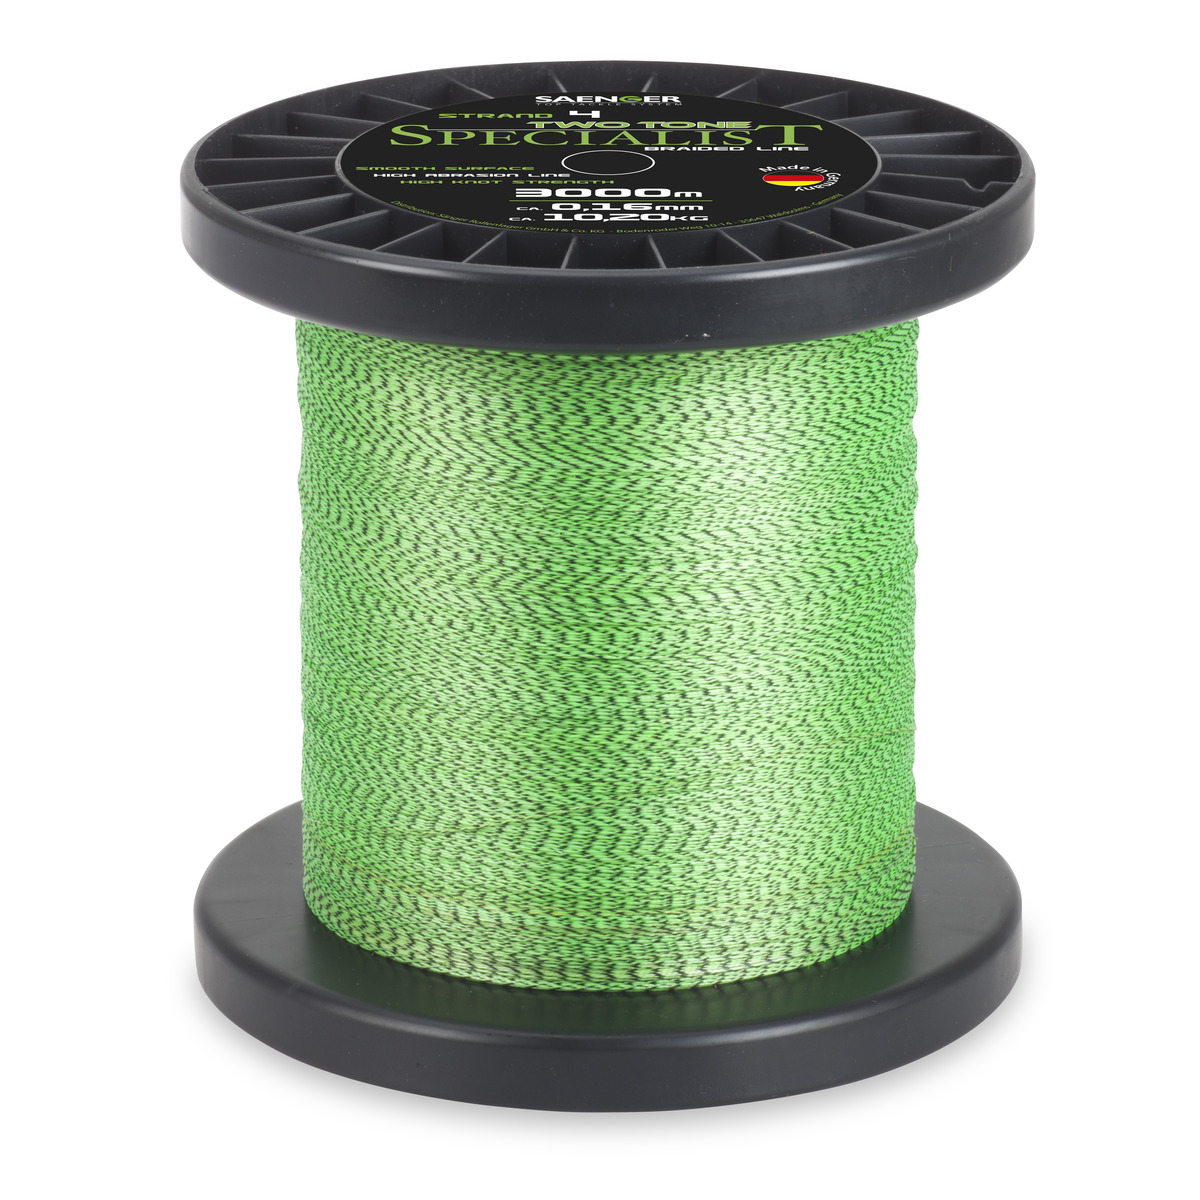 Saenger Specialist Two Tone Fluo Braid - 0,50 mm - 48,2kg 3000 m